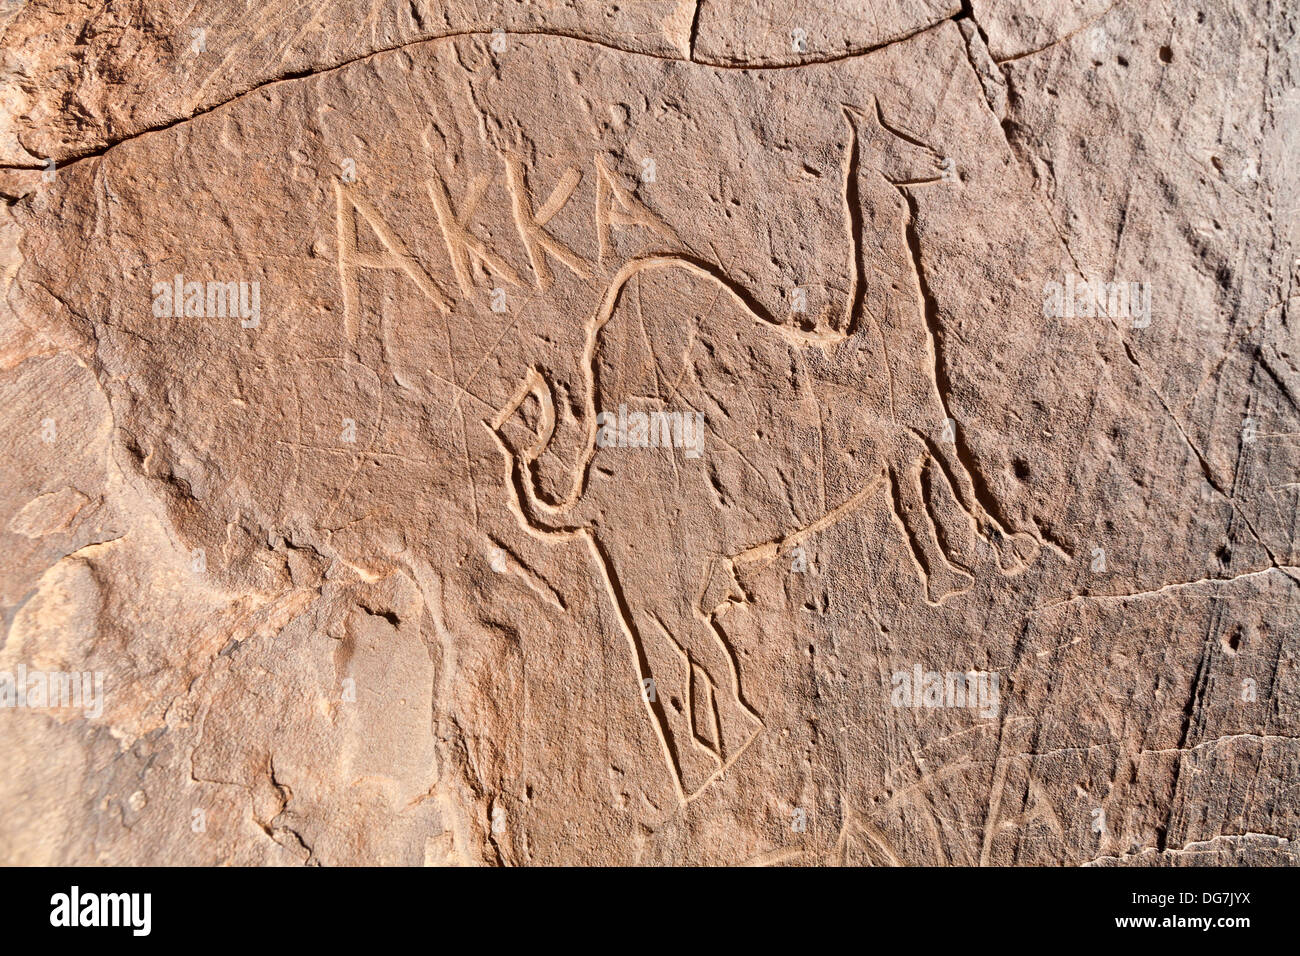 Modern graffiti at the site of the Prehistoric rock carvings at Aman Ighribin on the Tata to Akka road in Morocco Stock Photo